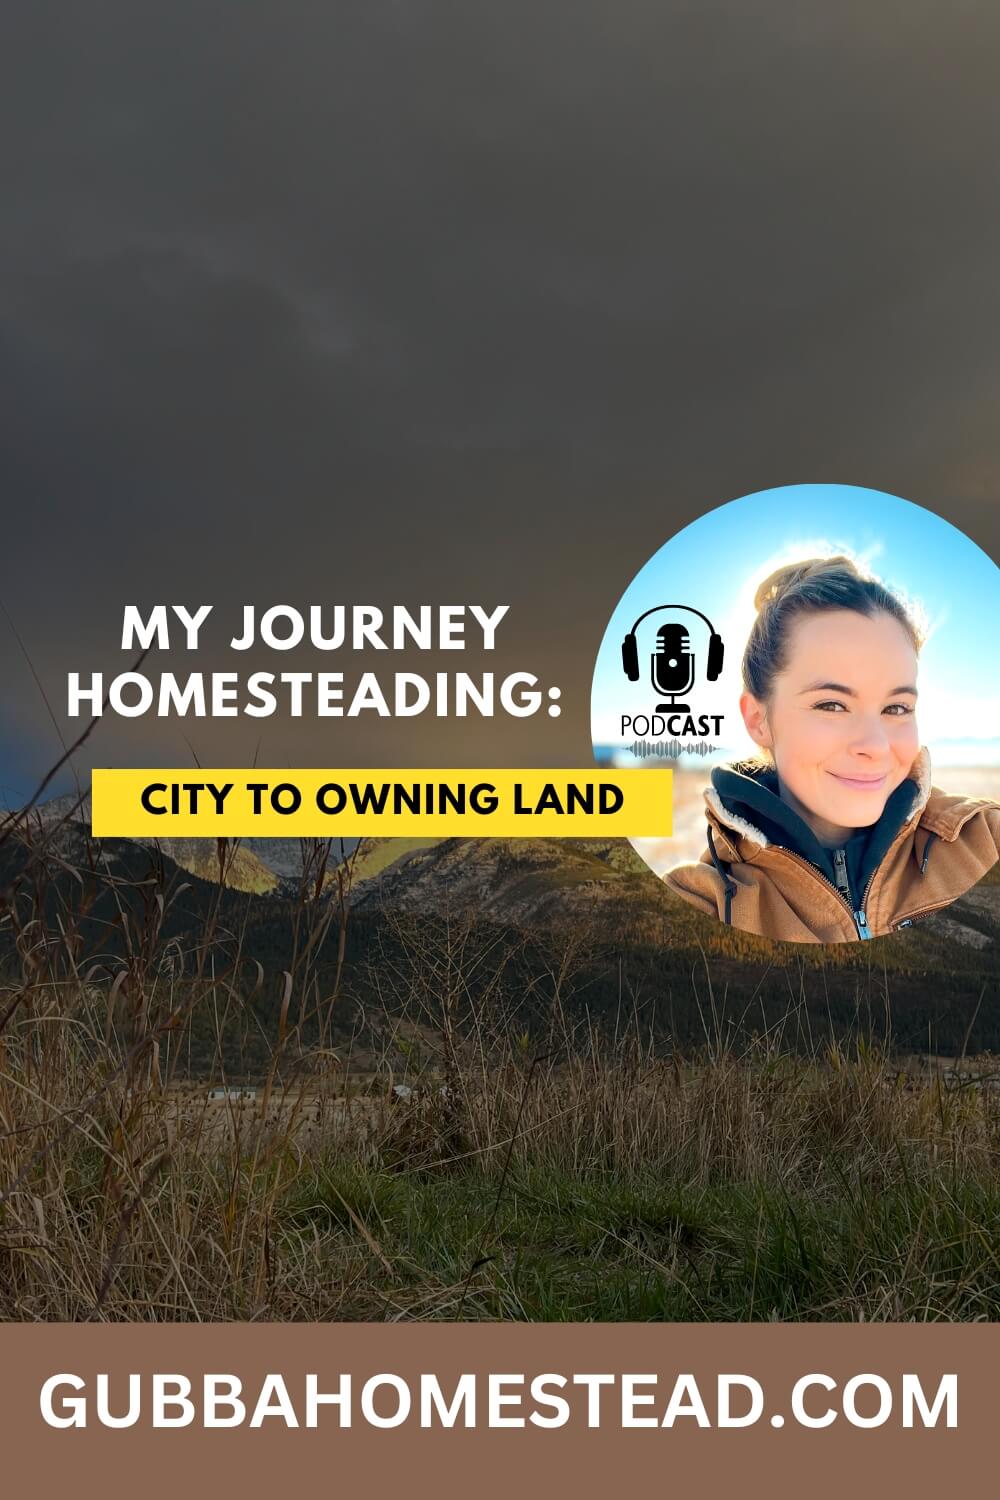 My Journey Homesteading: City to Owning Land